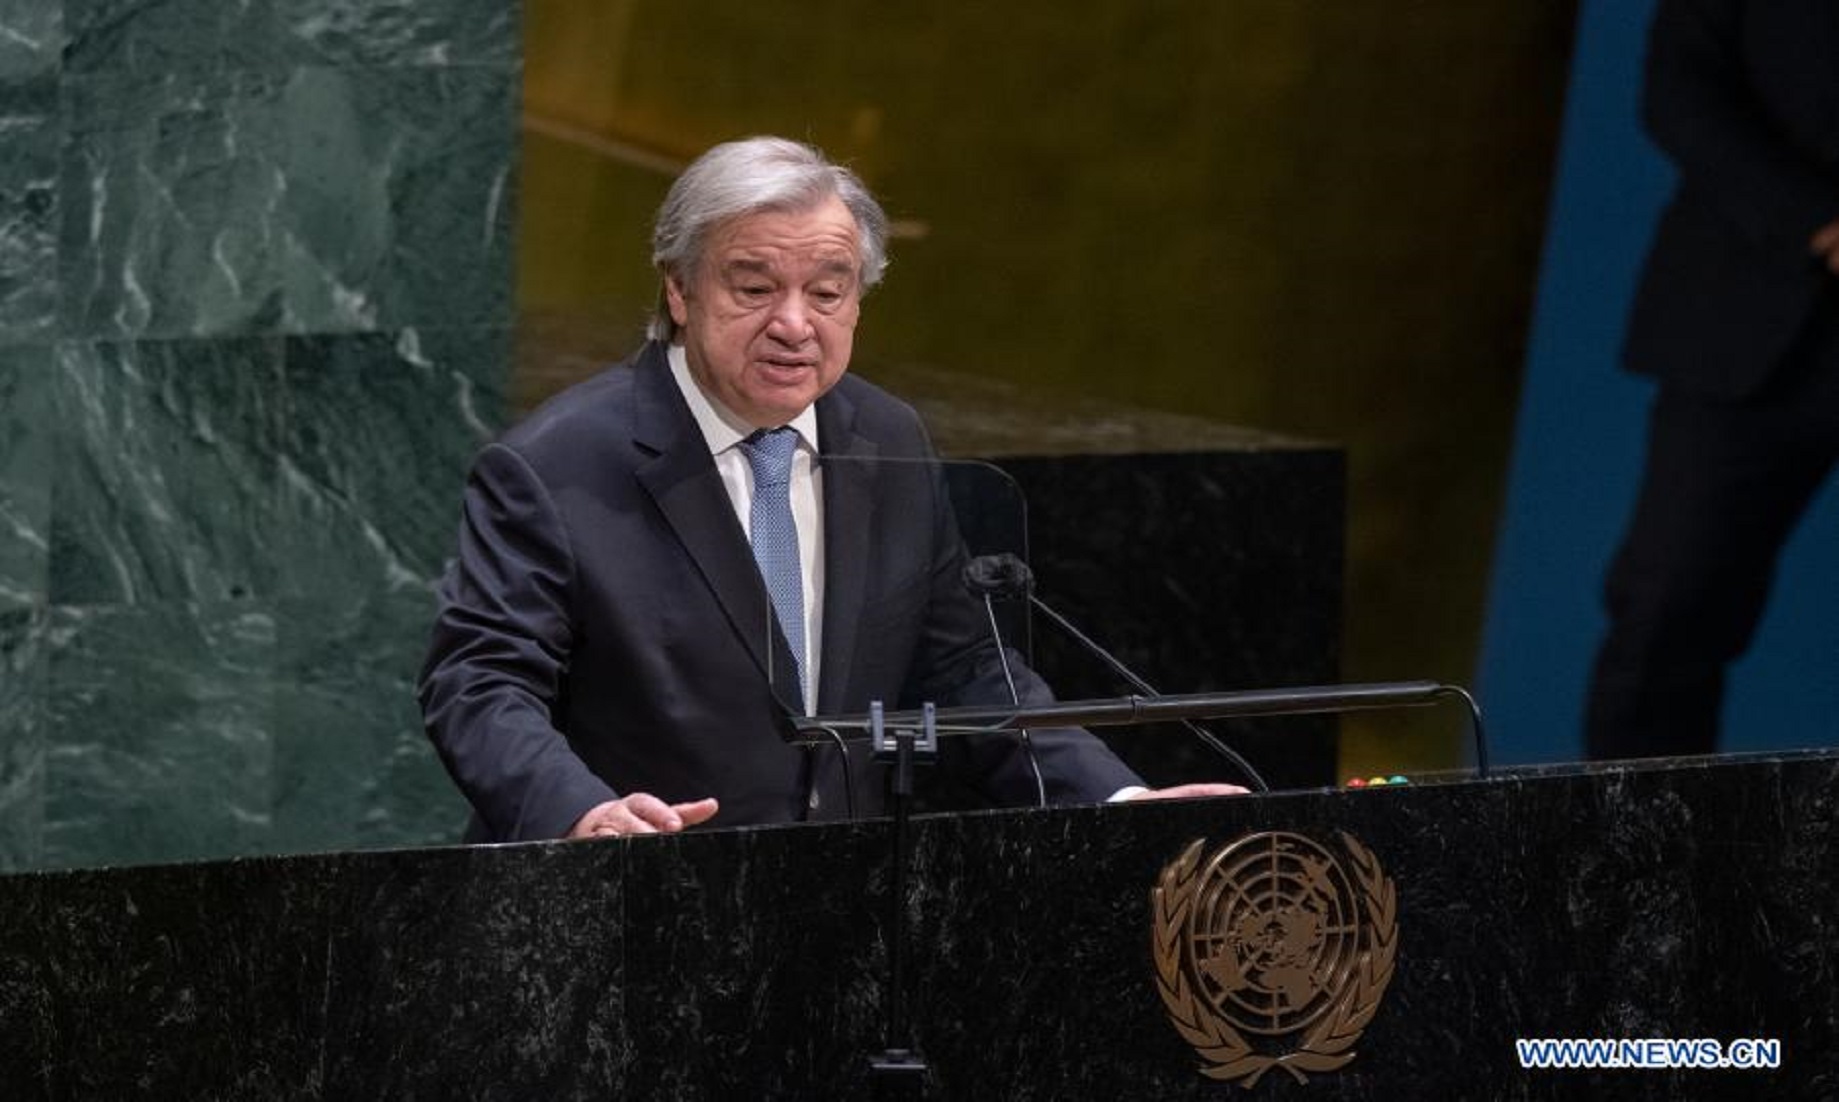 Human Rights Must Not Only Be Available To Privileged Few, Warns UN Chief